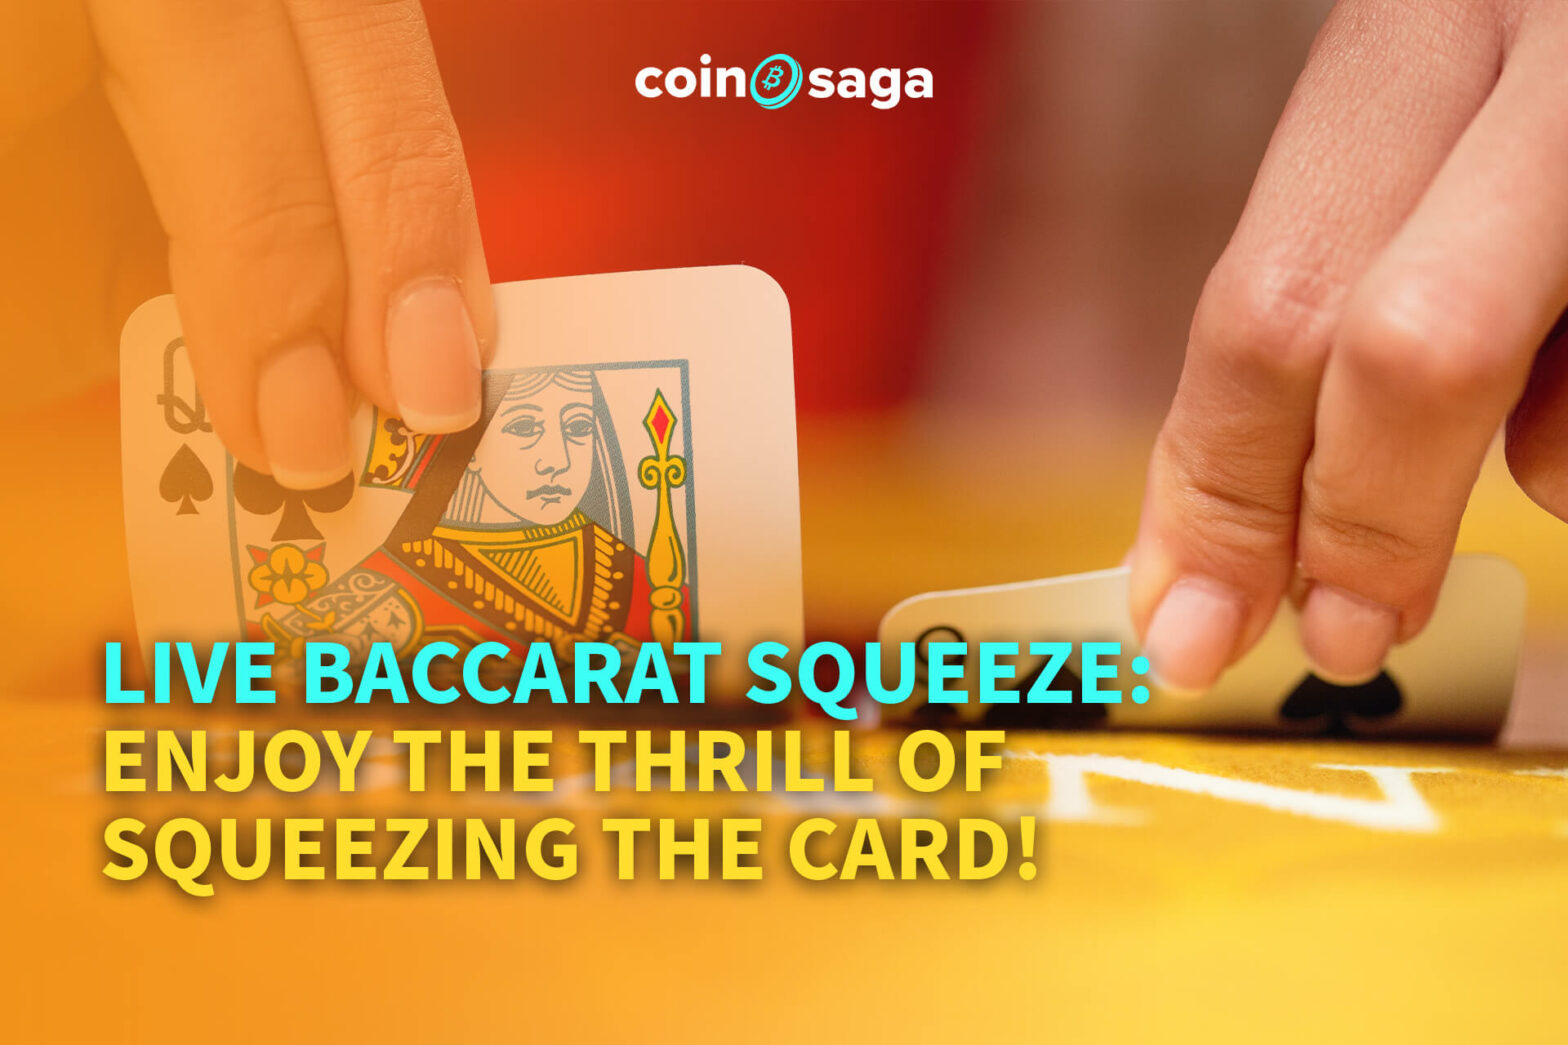 Live Baccarat Squeeze